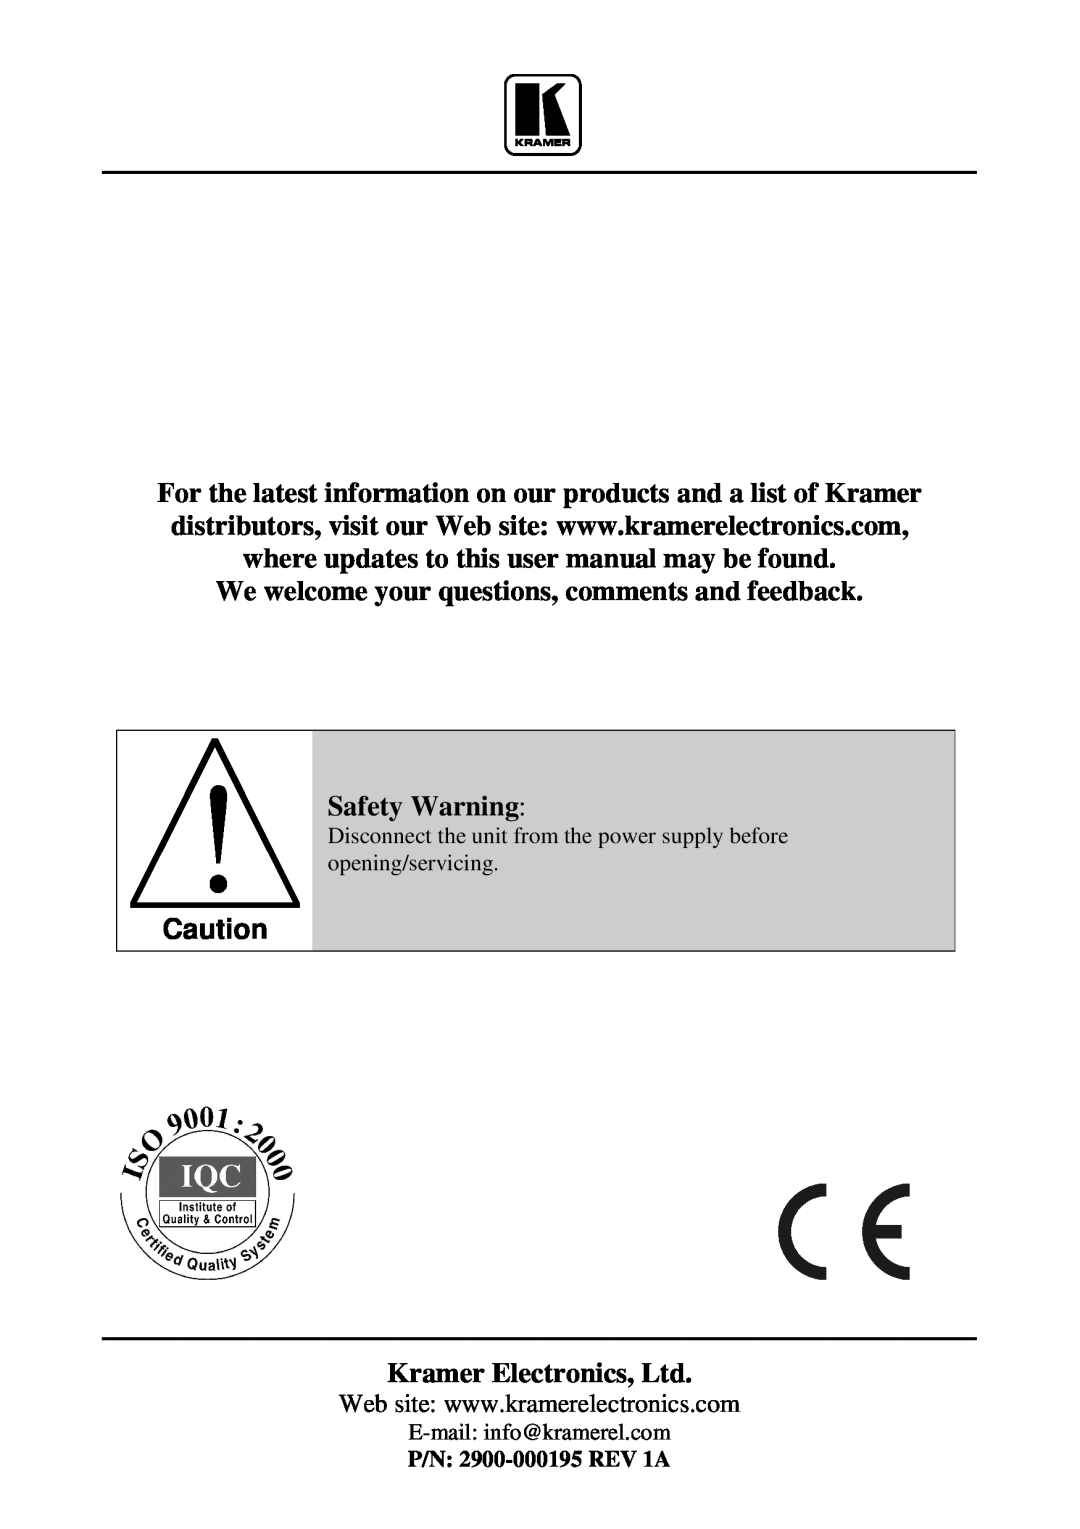 Kramer Electronics VP-727T We welcome your questions, comments and feedback Safety Warning, P/N 2900-000195 REV 1A 